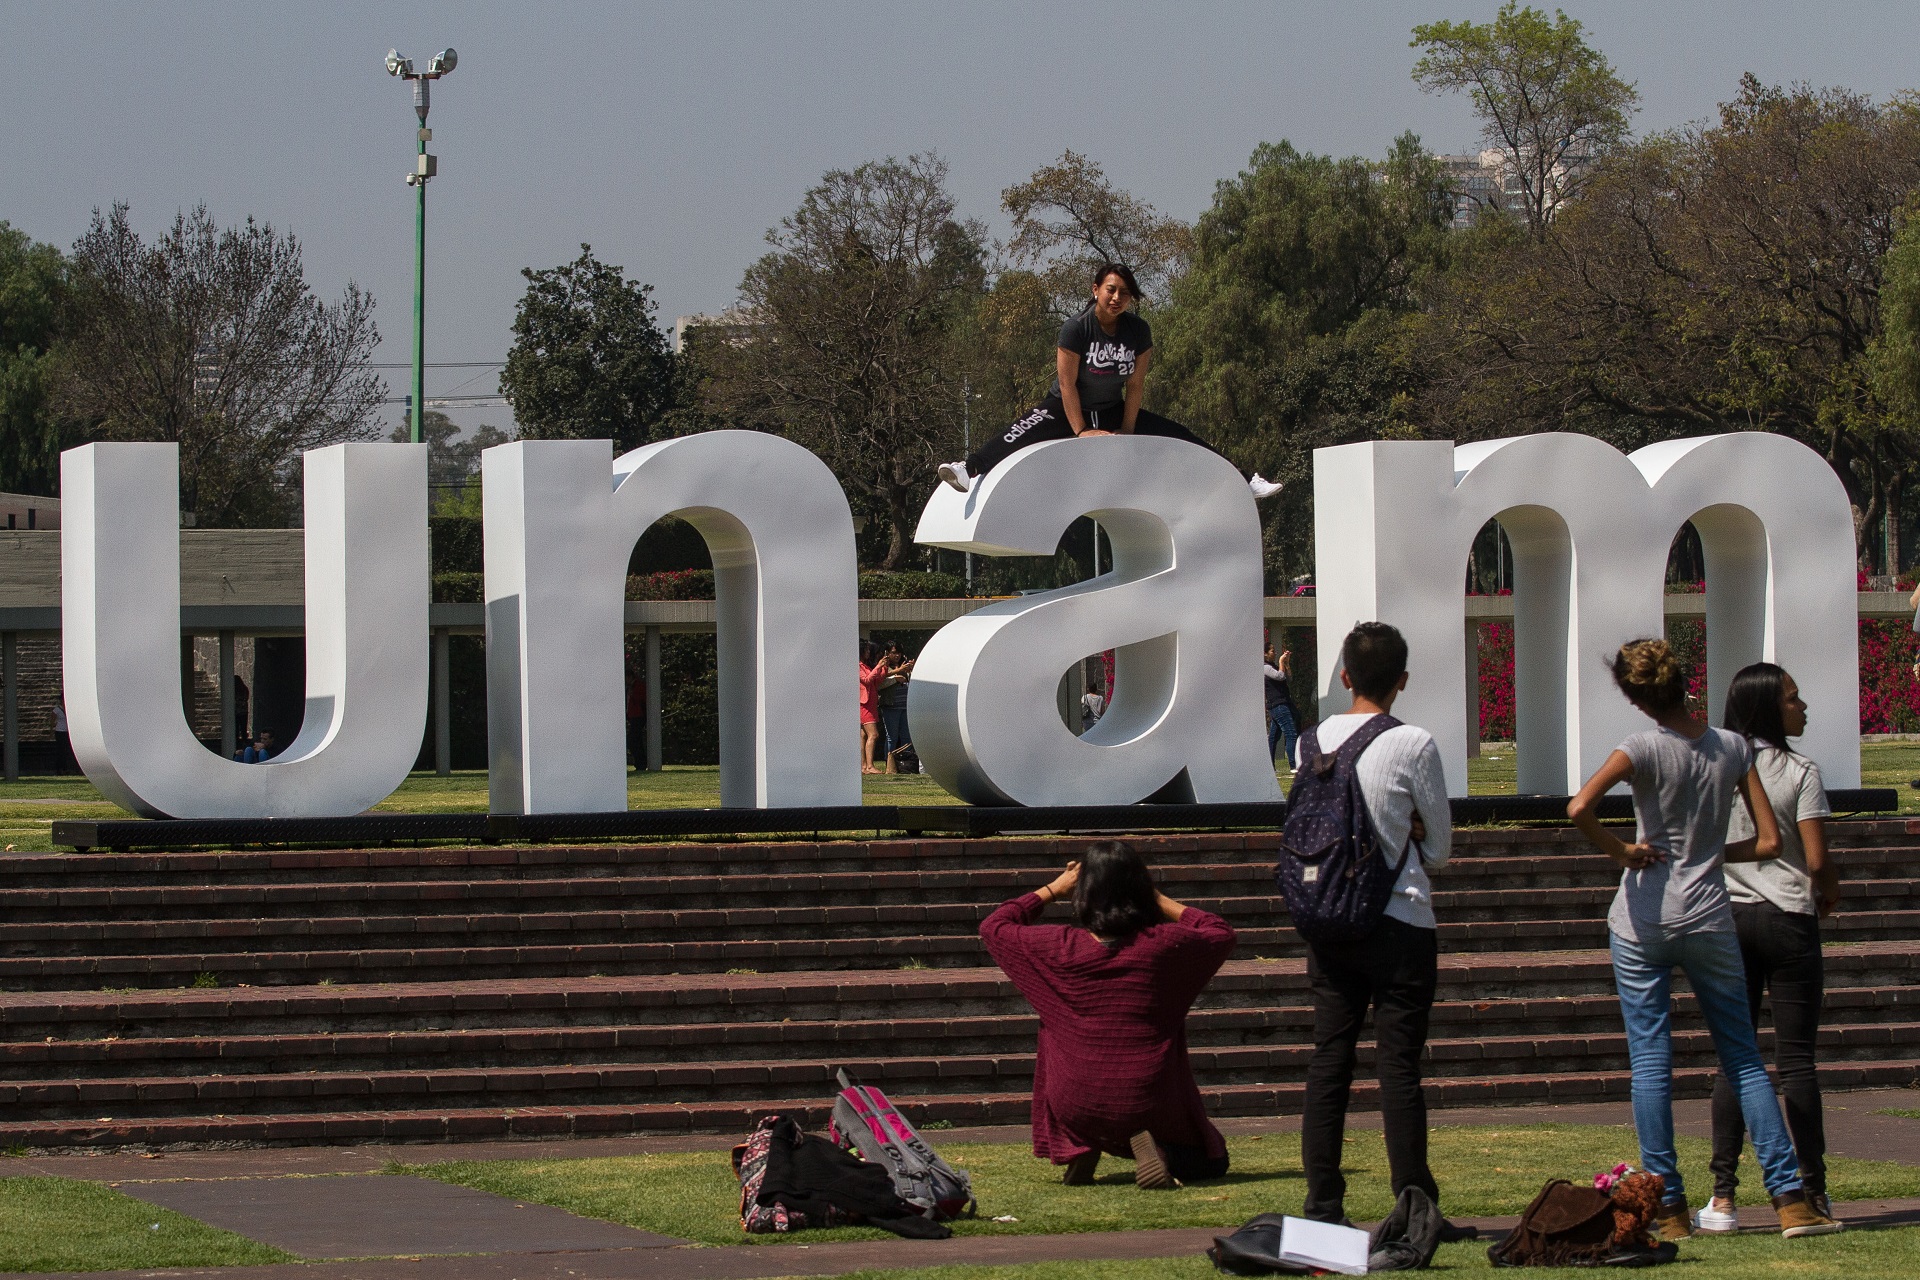 A UNAM mobilization triggered the decree of Student's Day (PHOTO: ISAAC ESQUIVEL / CUARTOSCURO.COM)